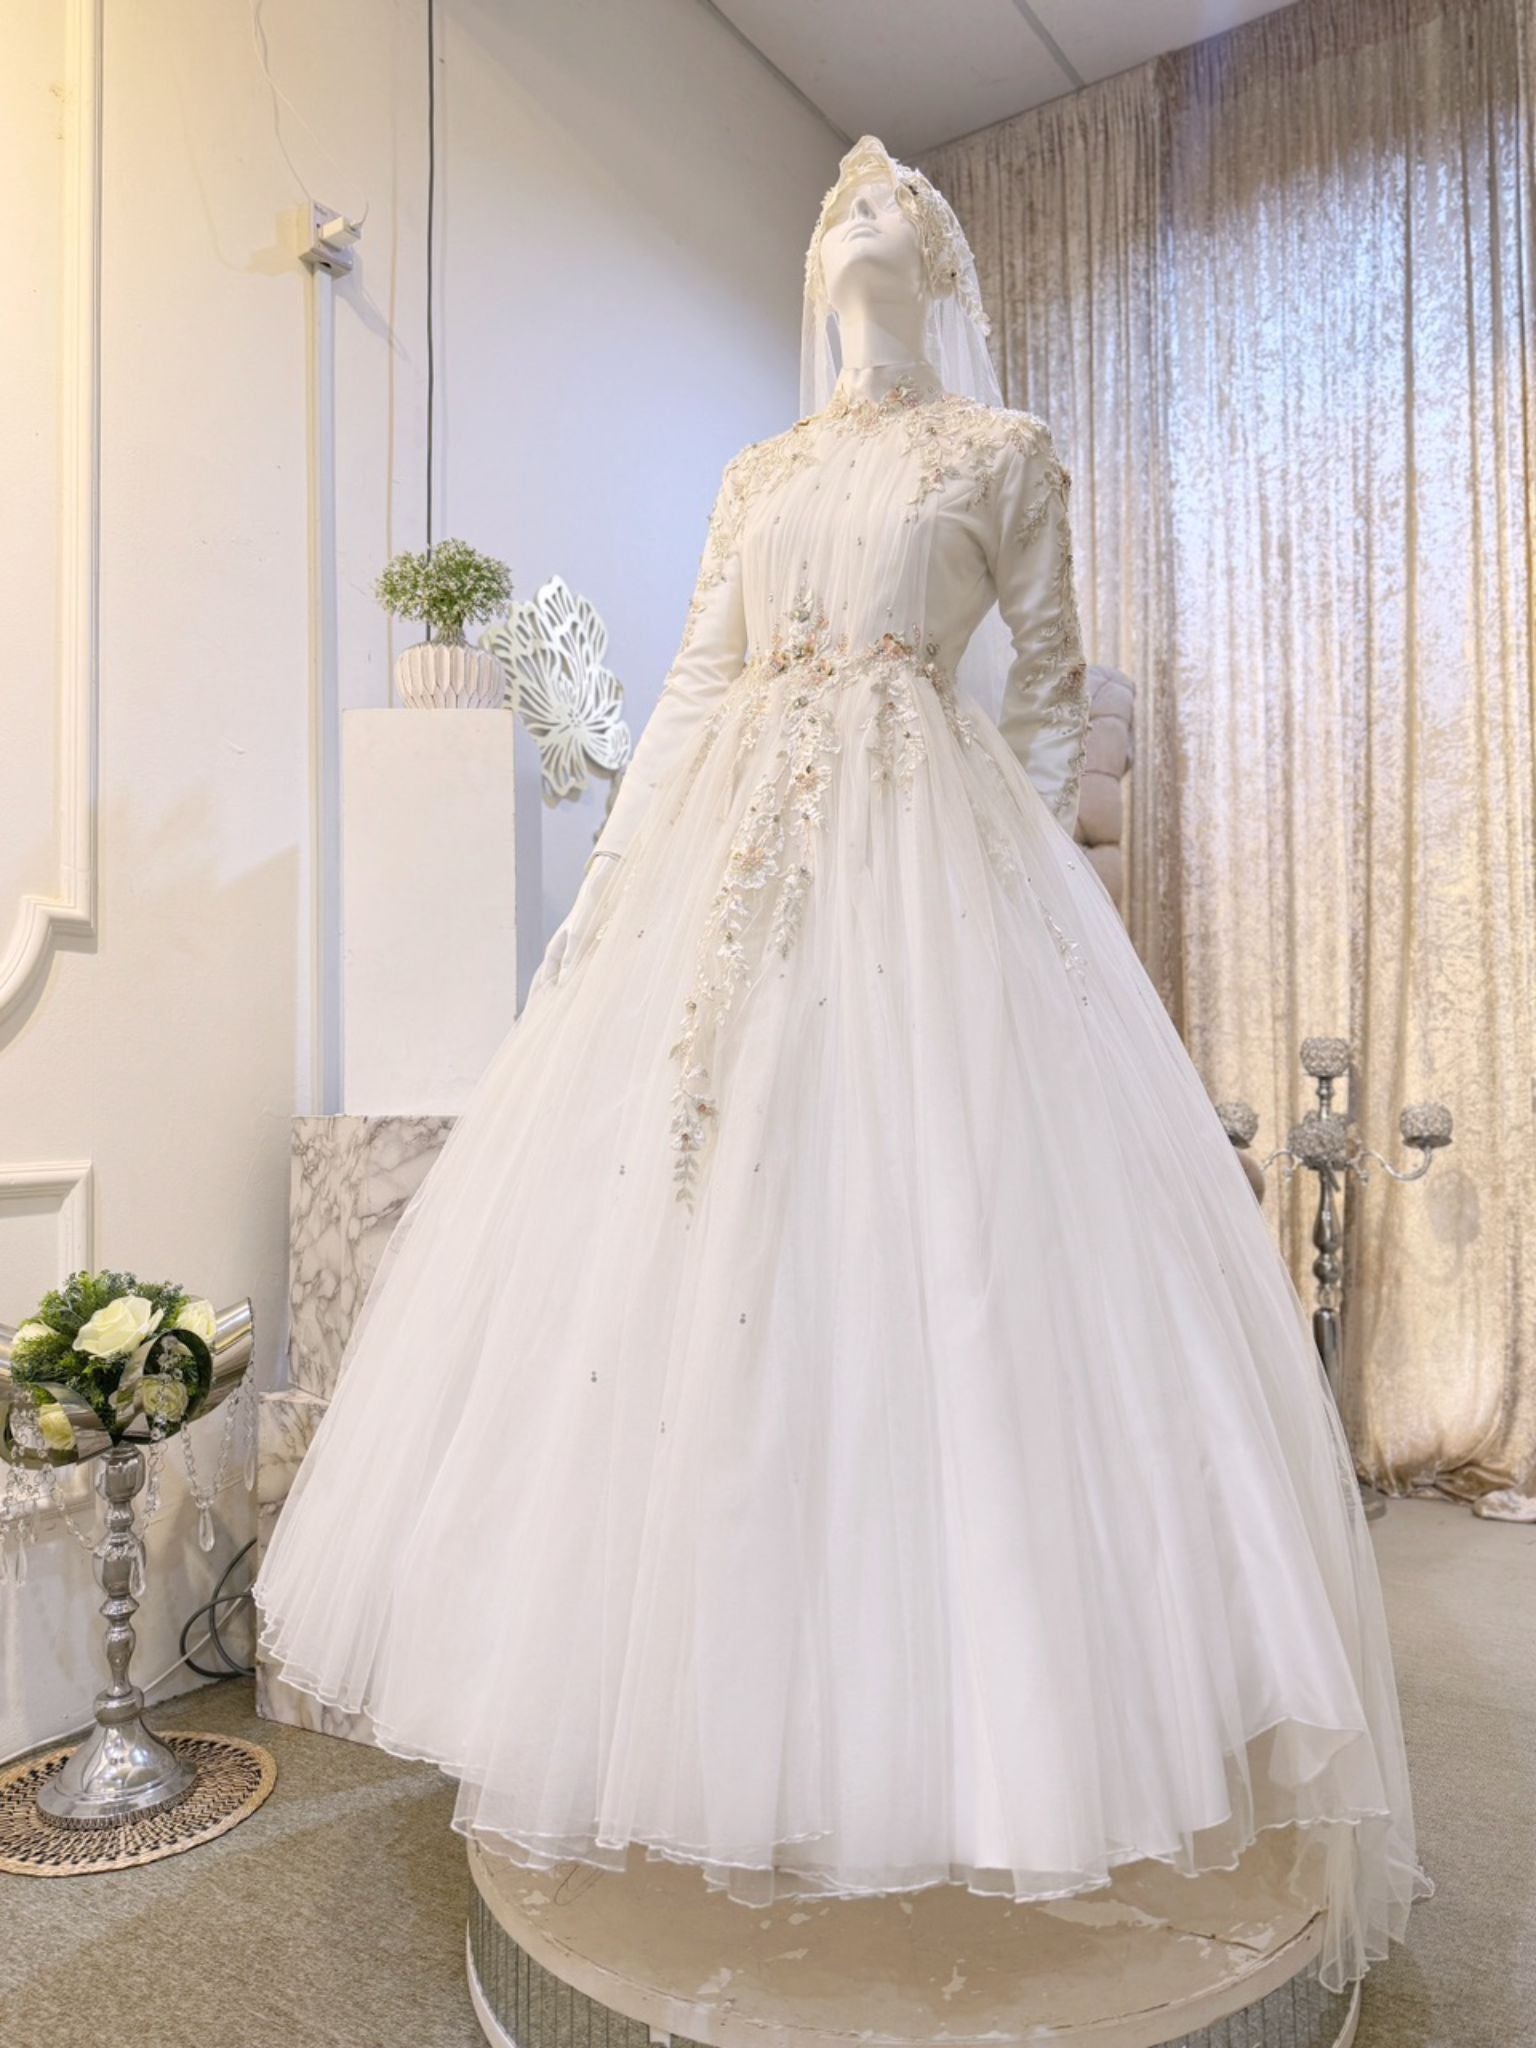 ELIZABETH  offers a mesmerizing ensemble for both bride and groom. Crafted from luxurious Duchess fabric with delicate lace detailing, the bride's attire features a stunning Ballgown design, while the groom can choose between a classic Suit or the intricate Kot Raihan Three-Piece ensemble. Available in sizes M to XL for both partners, this remarkable set is priced at MYR 850.00, down from RM1000.